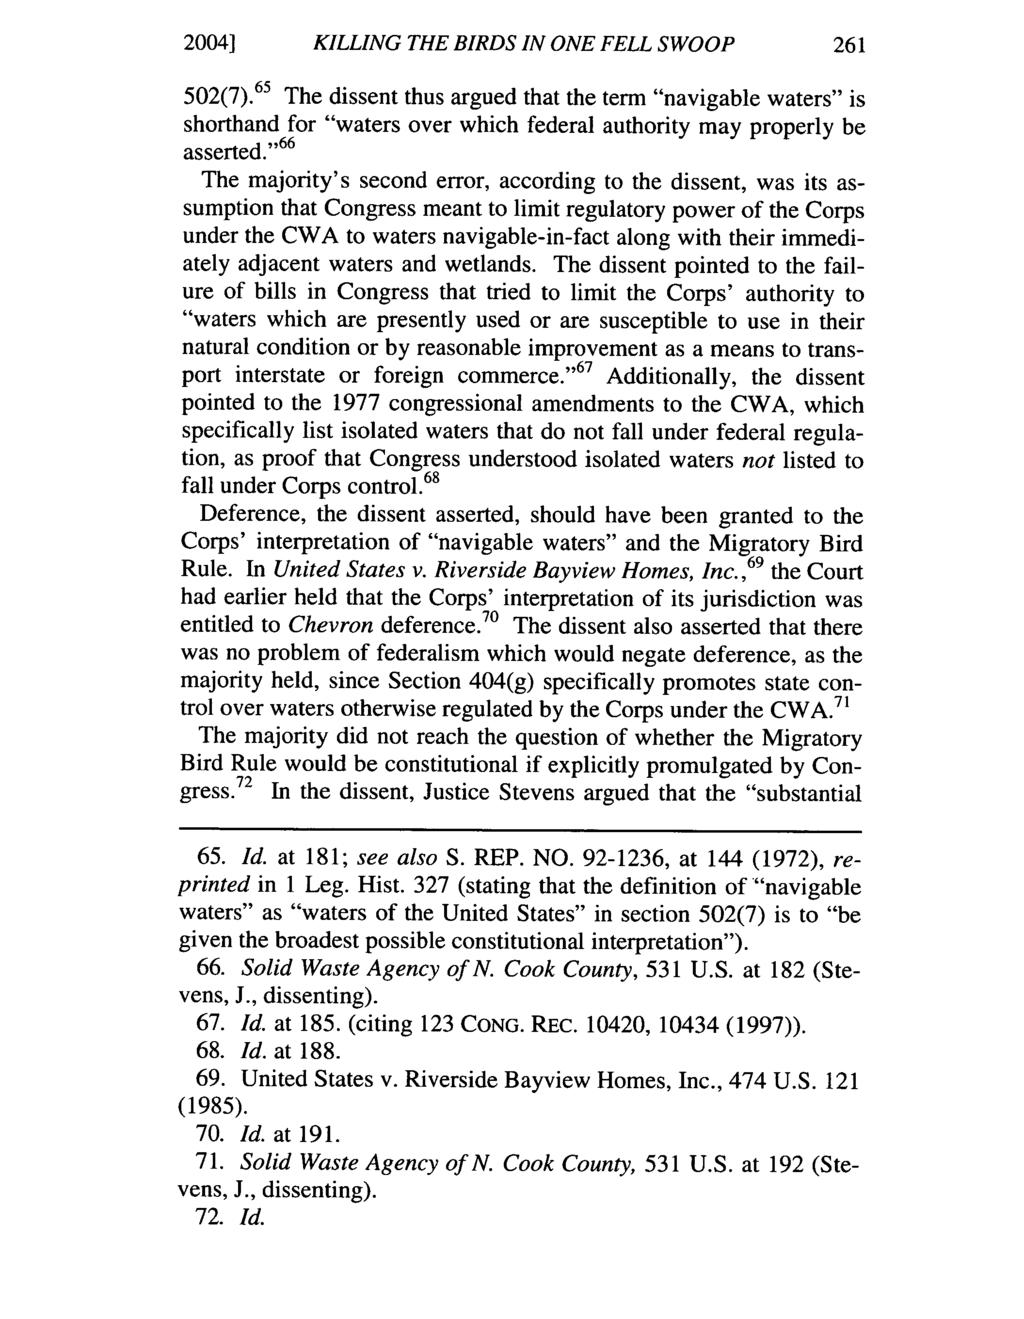 2004] KILLING THE BIRDS IN ONE FELL SWOOP 65 502(7). The dissent thus argued that the term "navigable waters" is shorthand for "waters over which federal authority may properly be asserted.